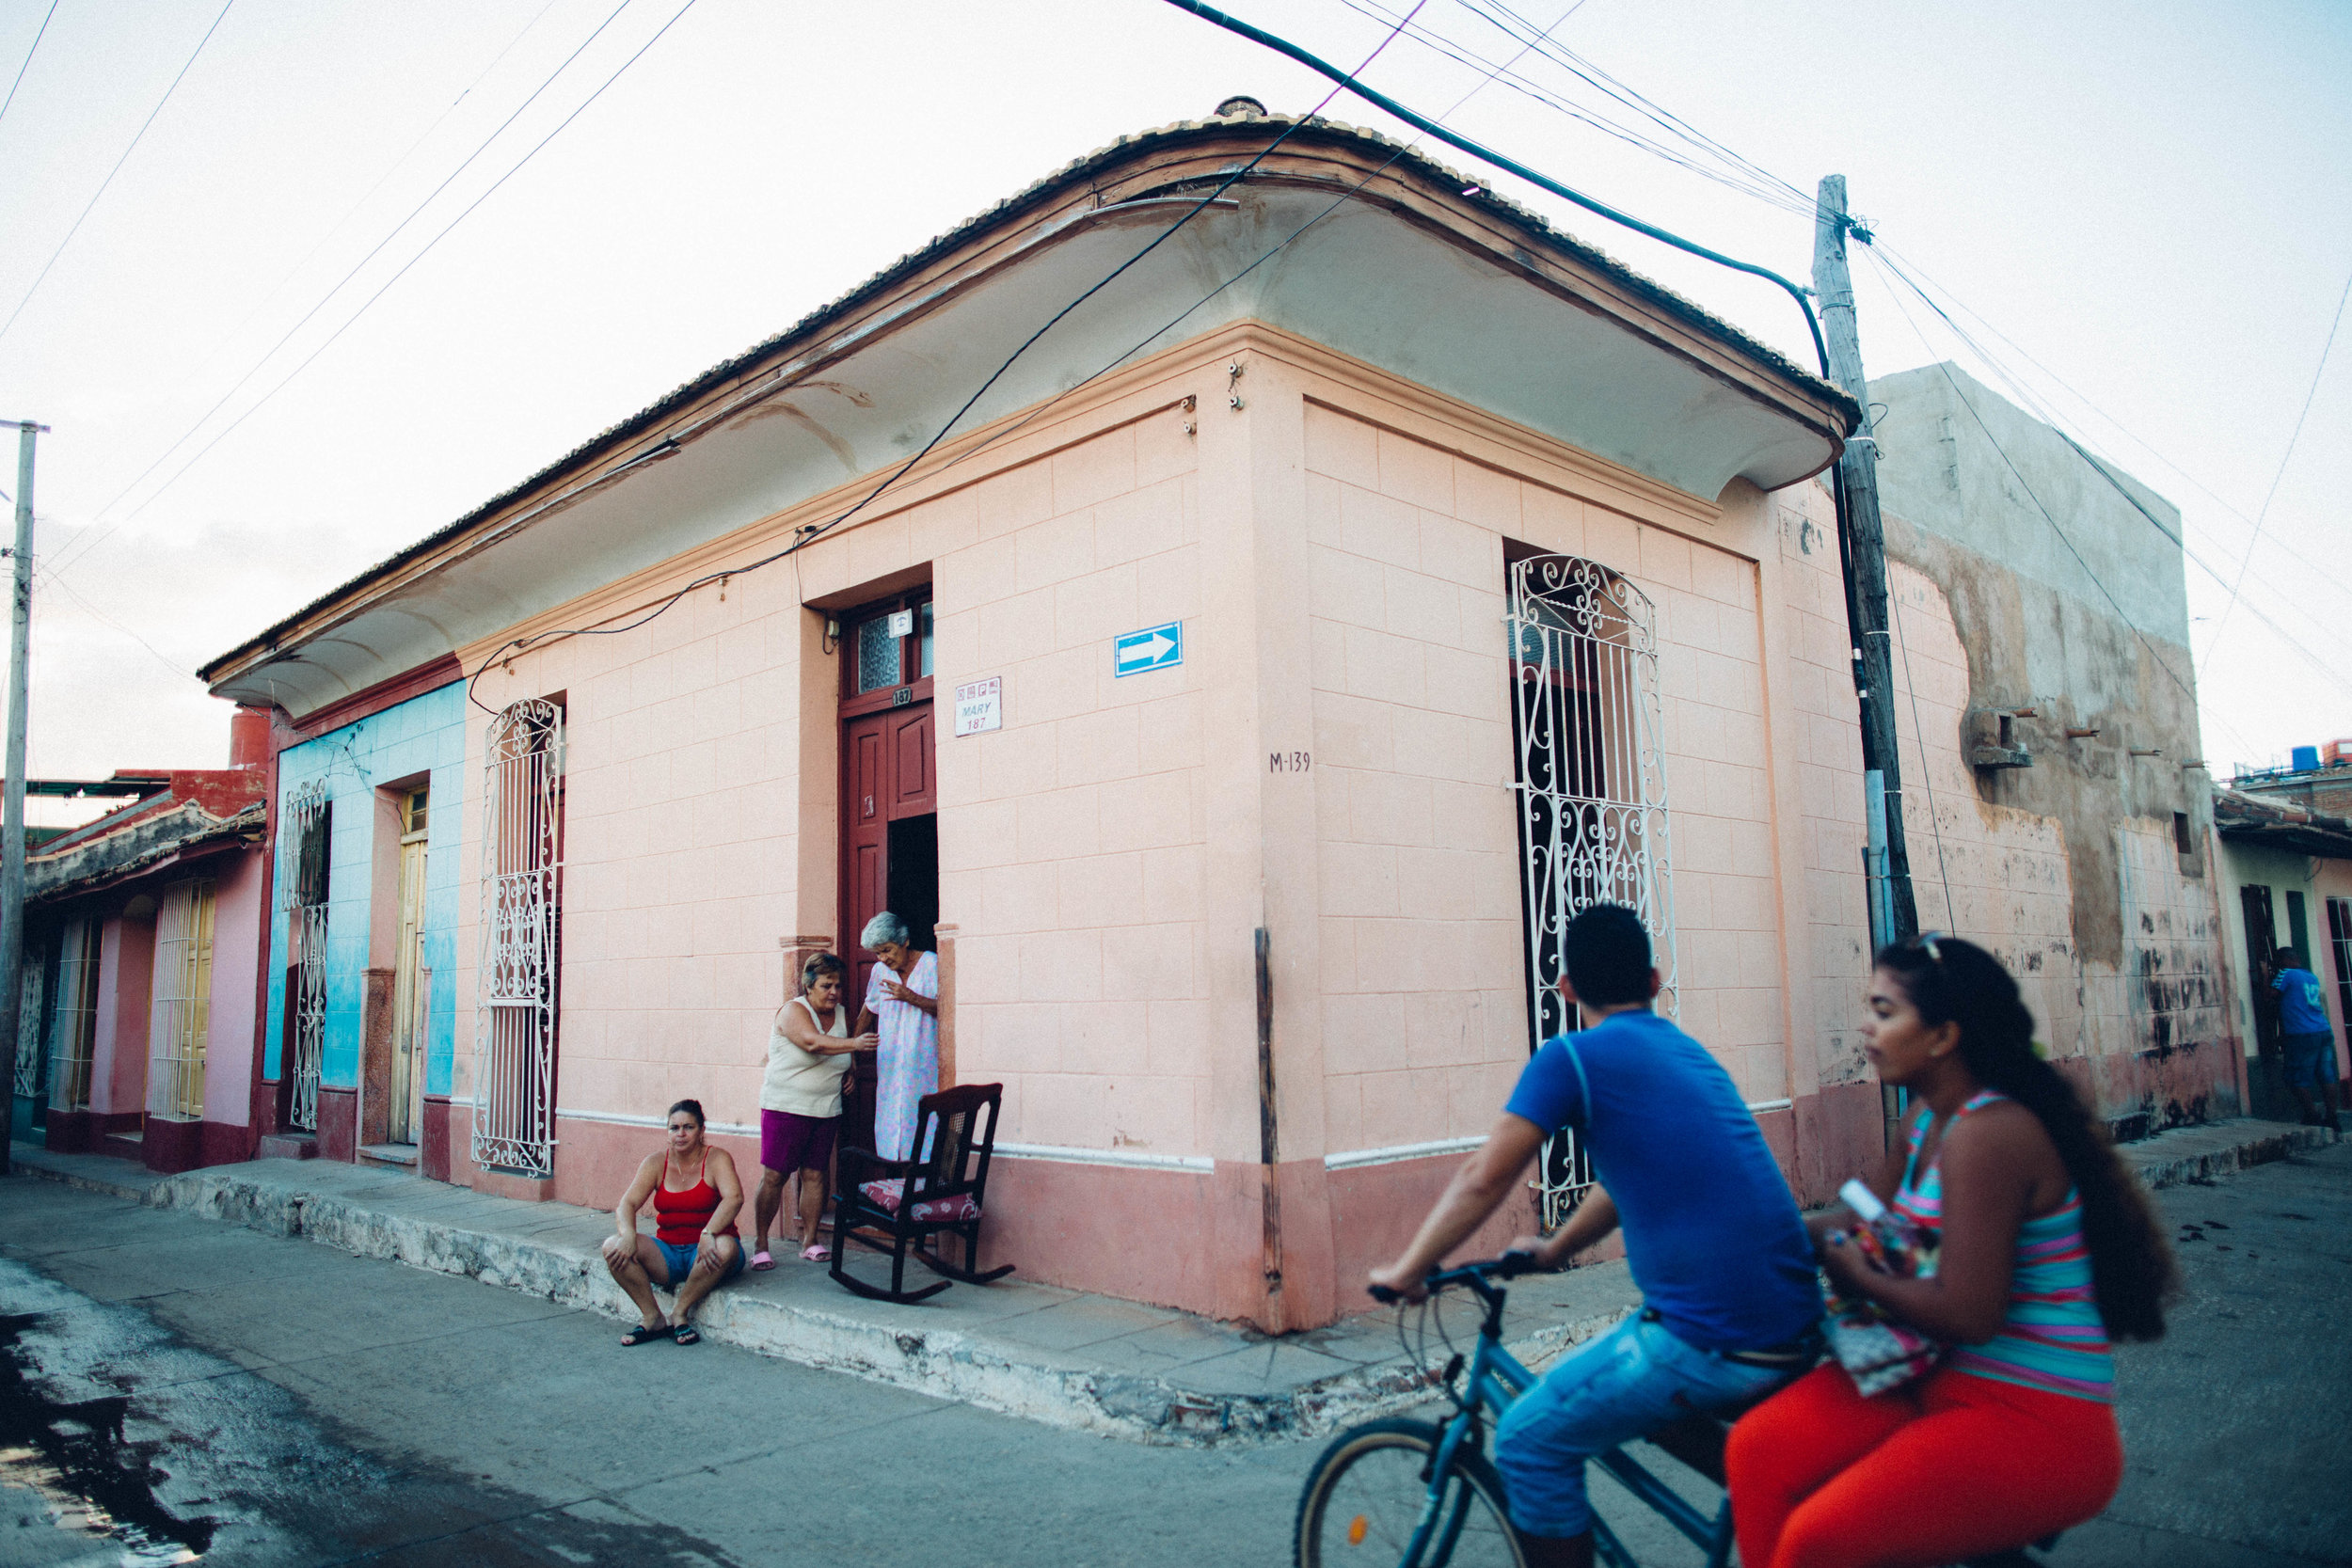   A daughter, a mother and a grandmother congregate outside their home in Trinidad as a young couple rides past on a bike. Trinidad, Cuba.  